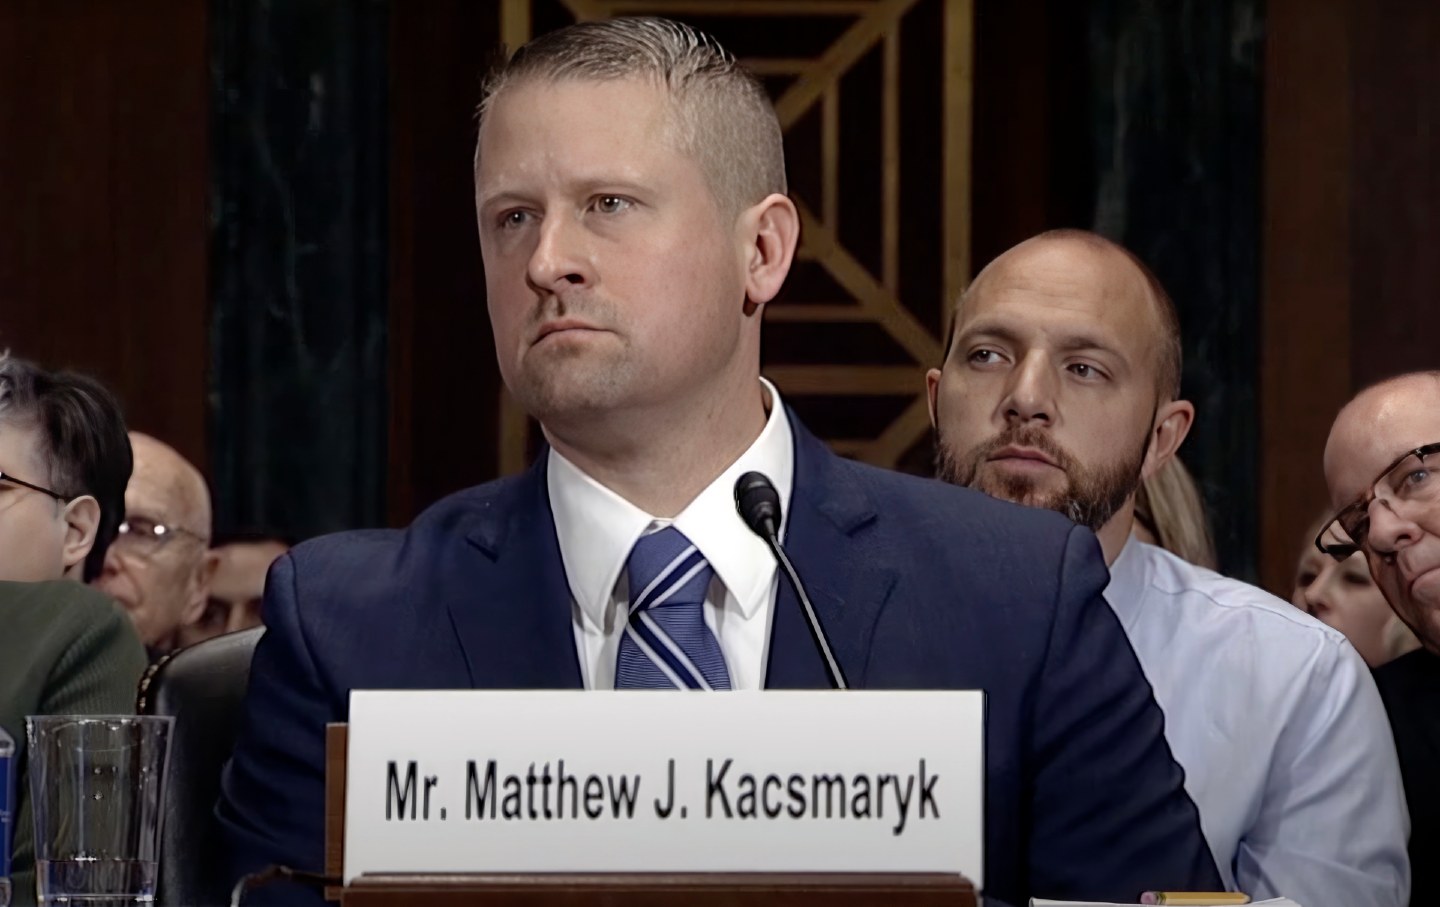 Matthew Kacsmaryk listens during his confirmation hearing before the Senate Judiciary Committee on Capitol Hill in Washington, on December 13, 2017.